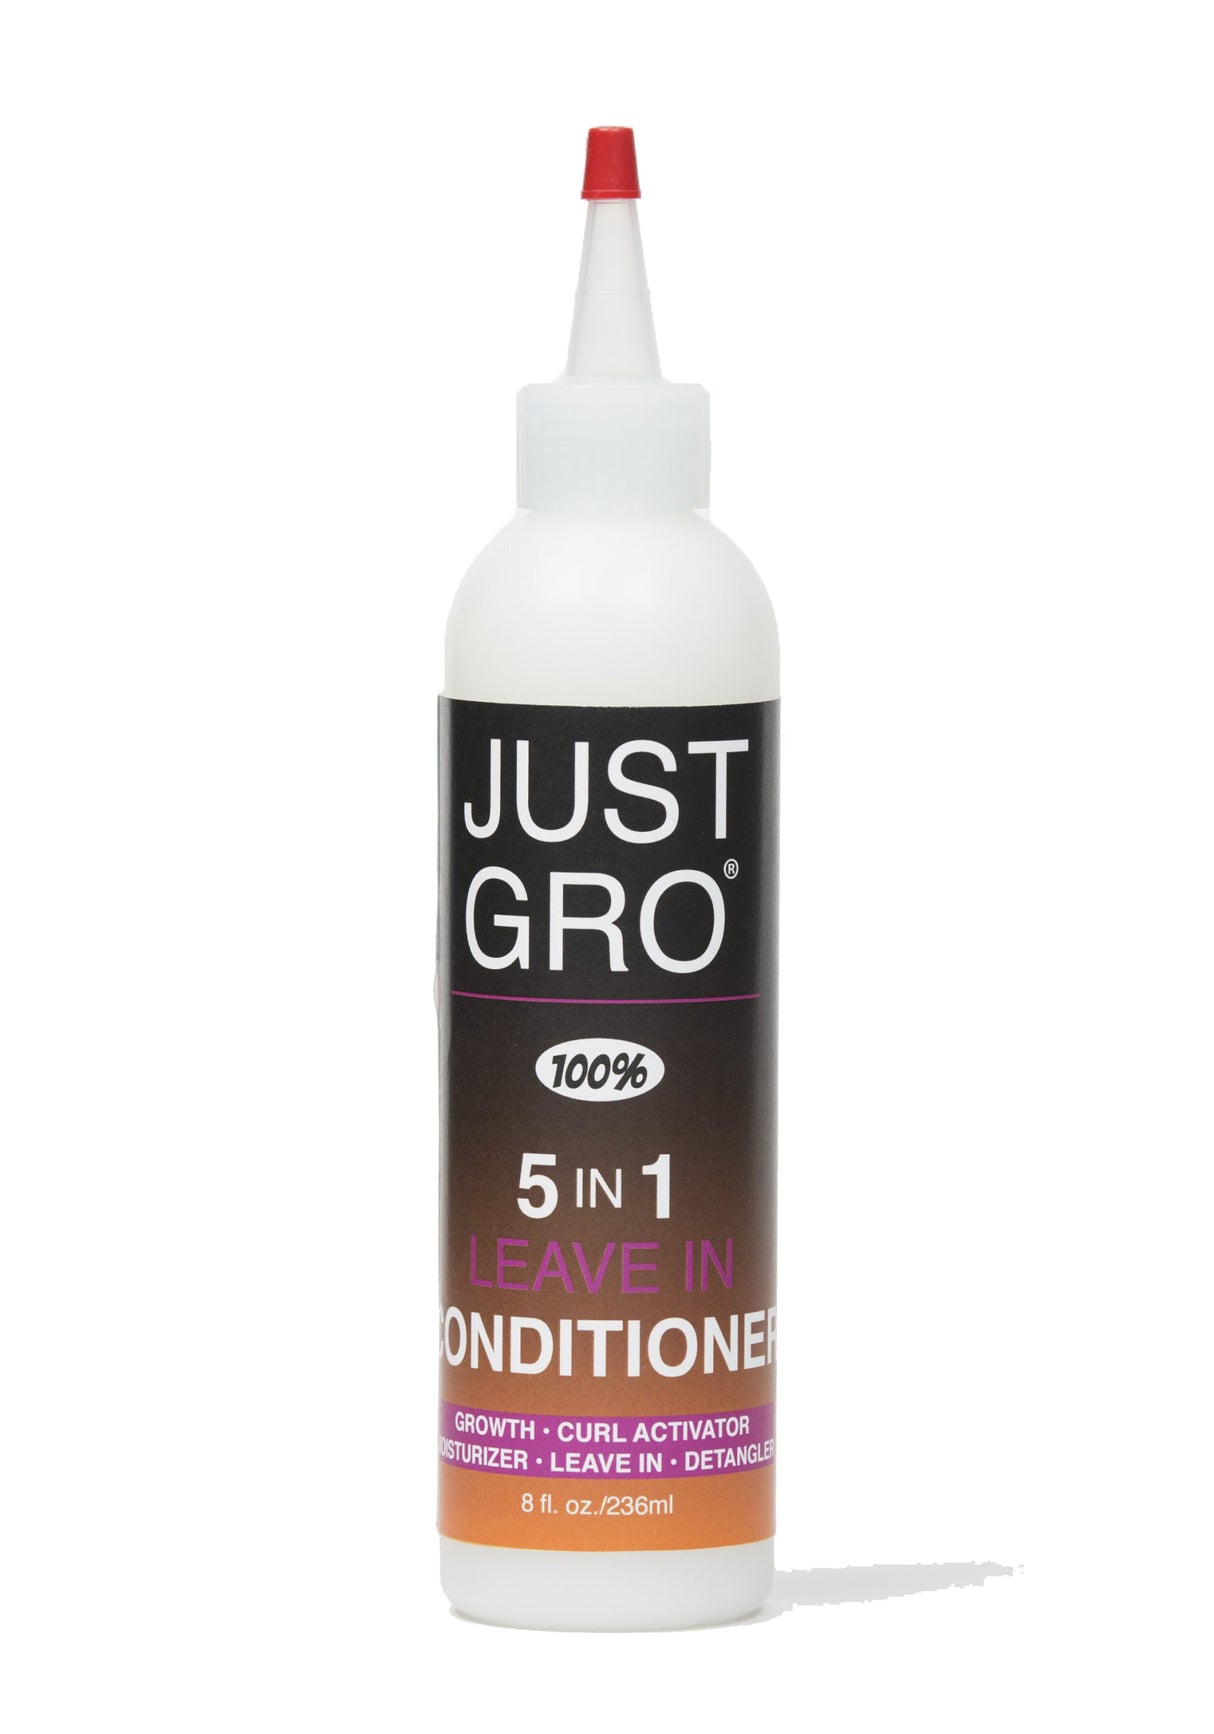 Just Gro® 100% 5-in-1 Leave-in Conditioner